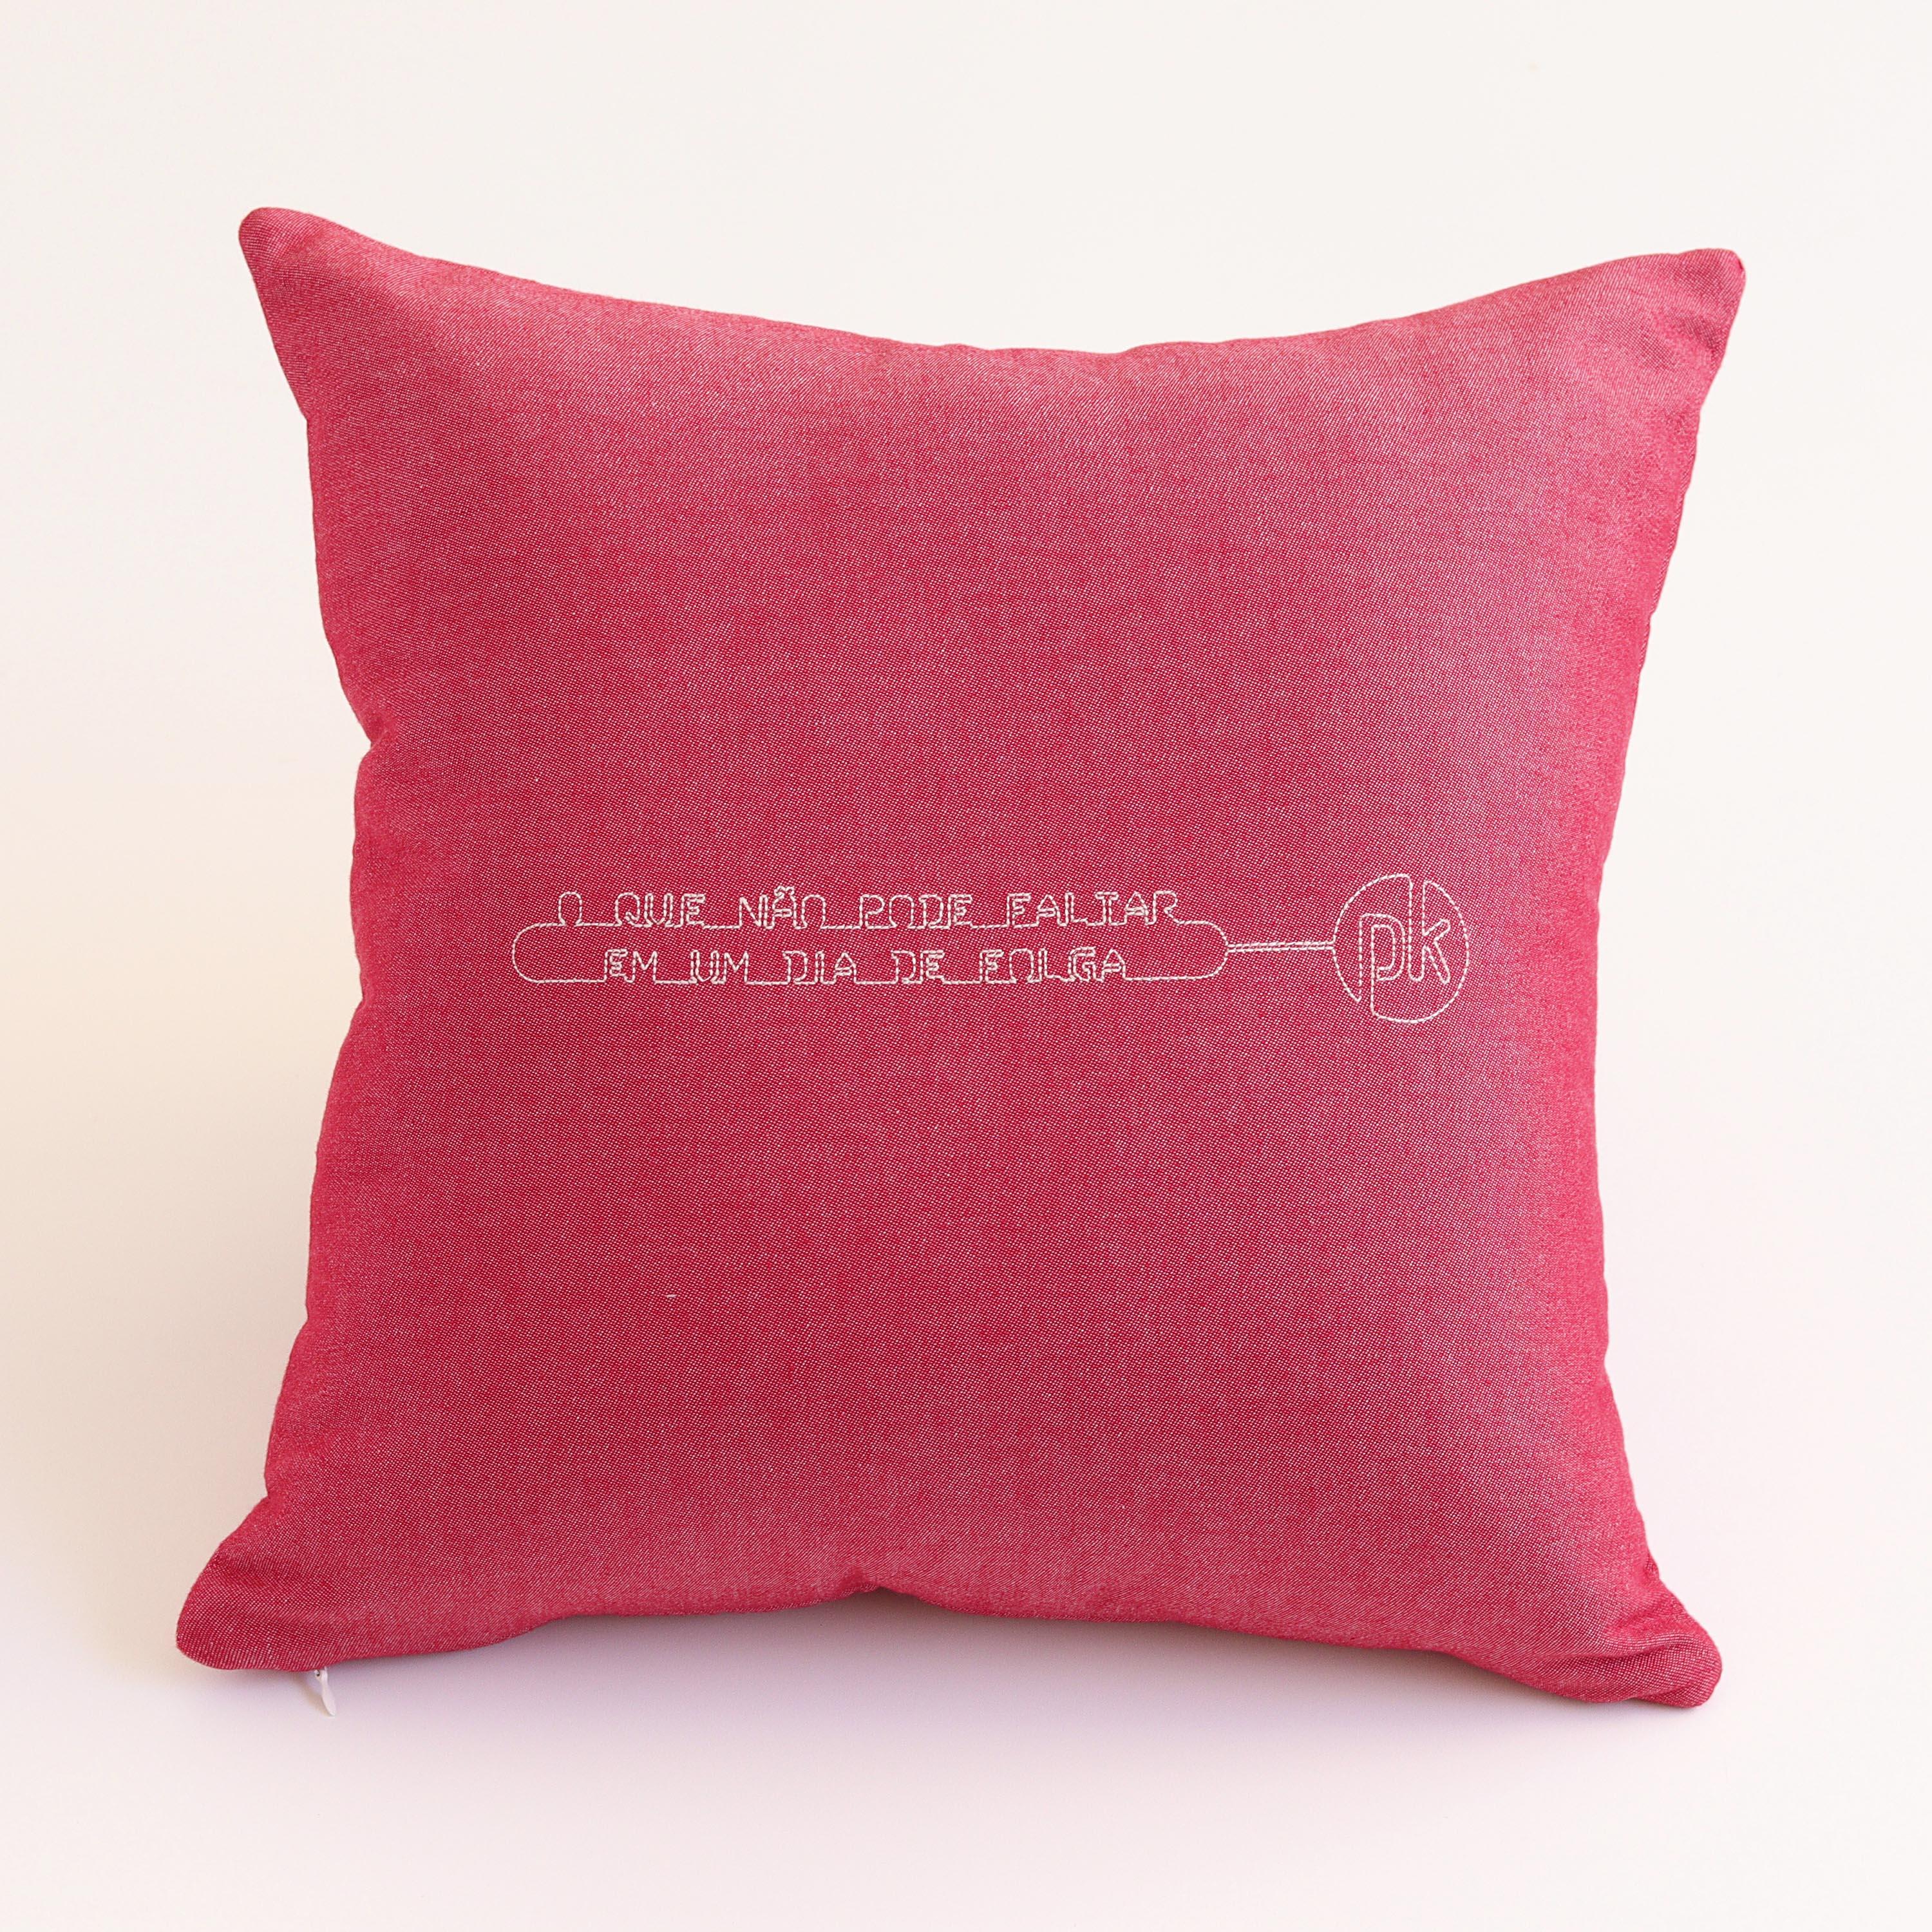 Modern Red Cotton Matelasse Cake Pillow by Paulo Kobylka For Sale